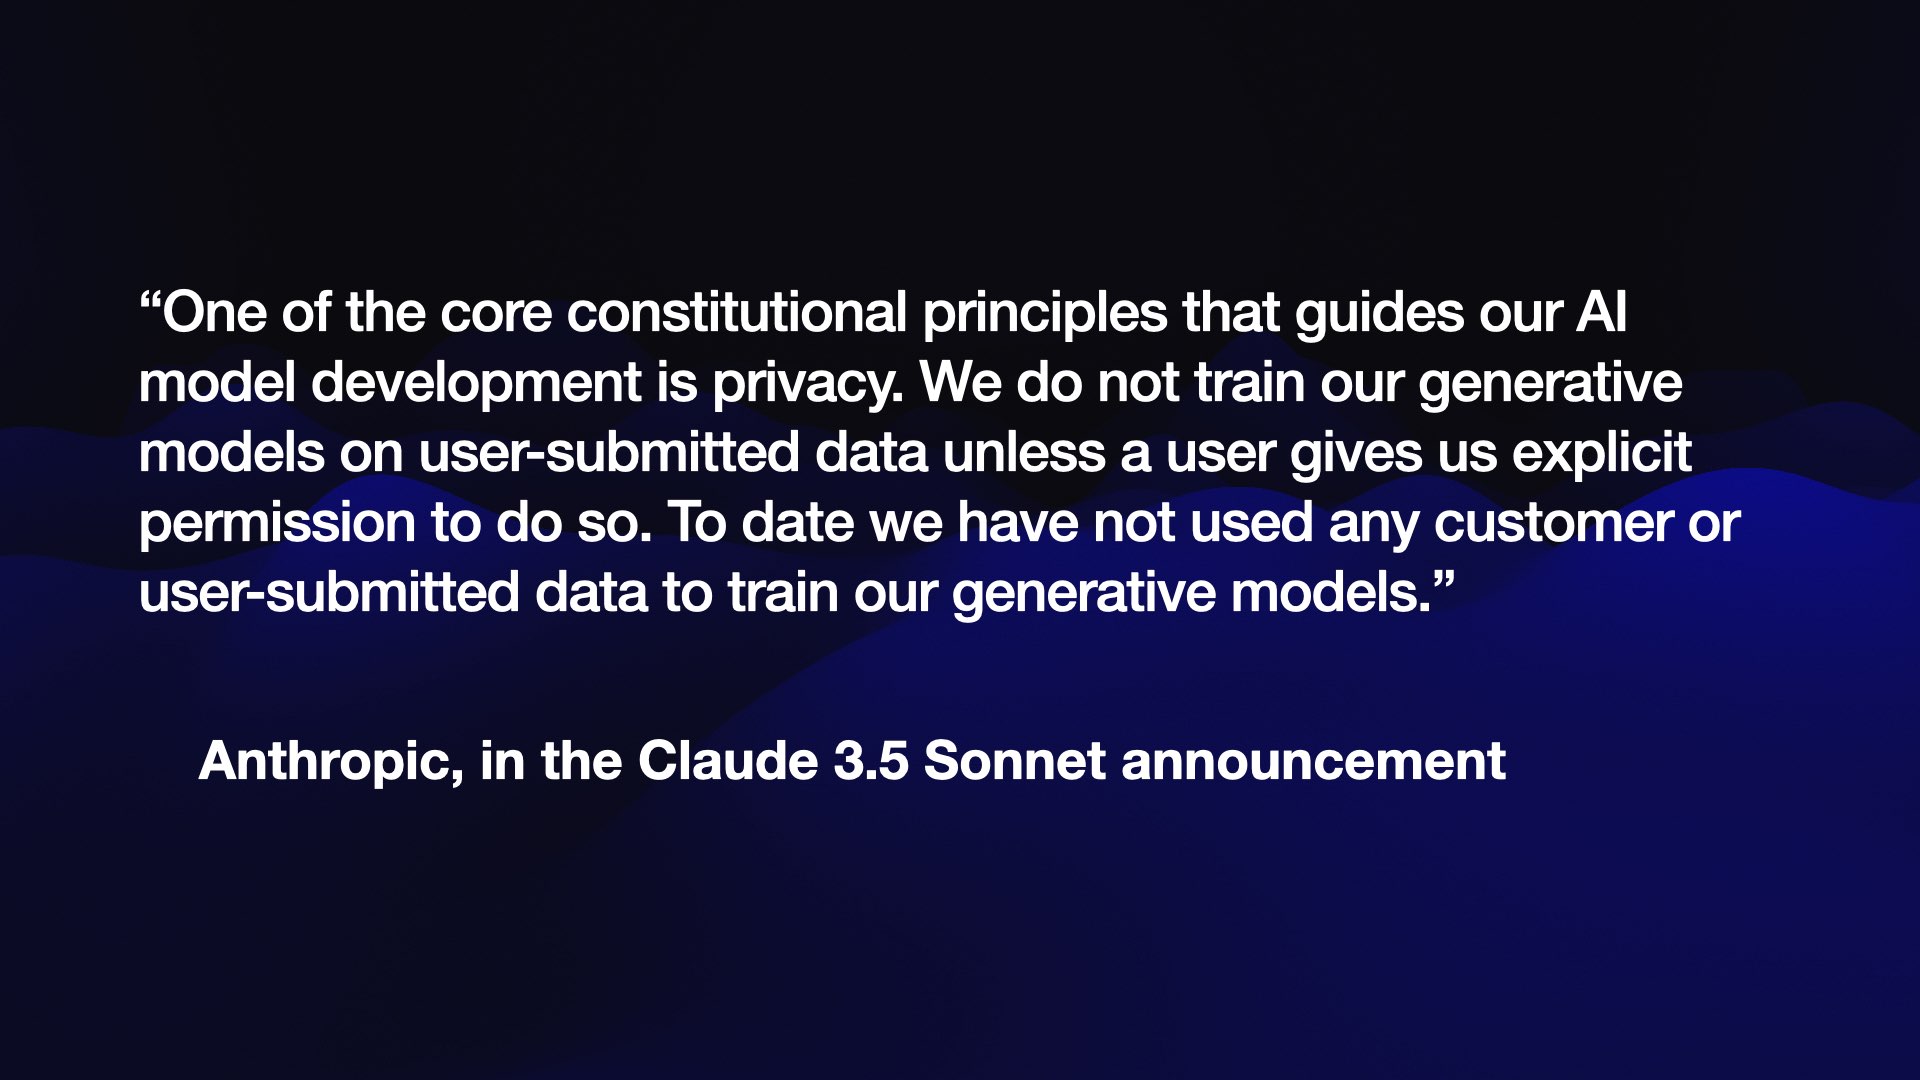 “One of the core constitutional principles that guides our AI model development is privacy. We do not train our generative models on user-submitted data unless a user gives us explicit permission to do so. To date we have not used any customer or user-submitted data to train our generative models.”  Anthropic, in the Claude 3.5 Sonnet announcement 